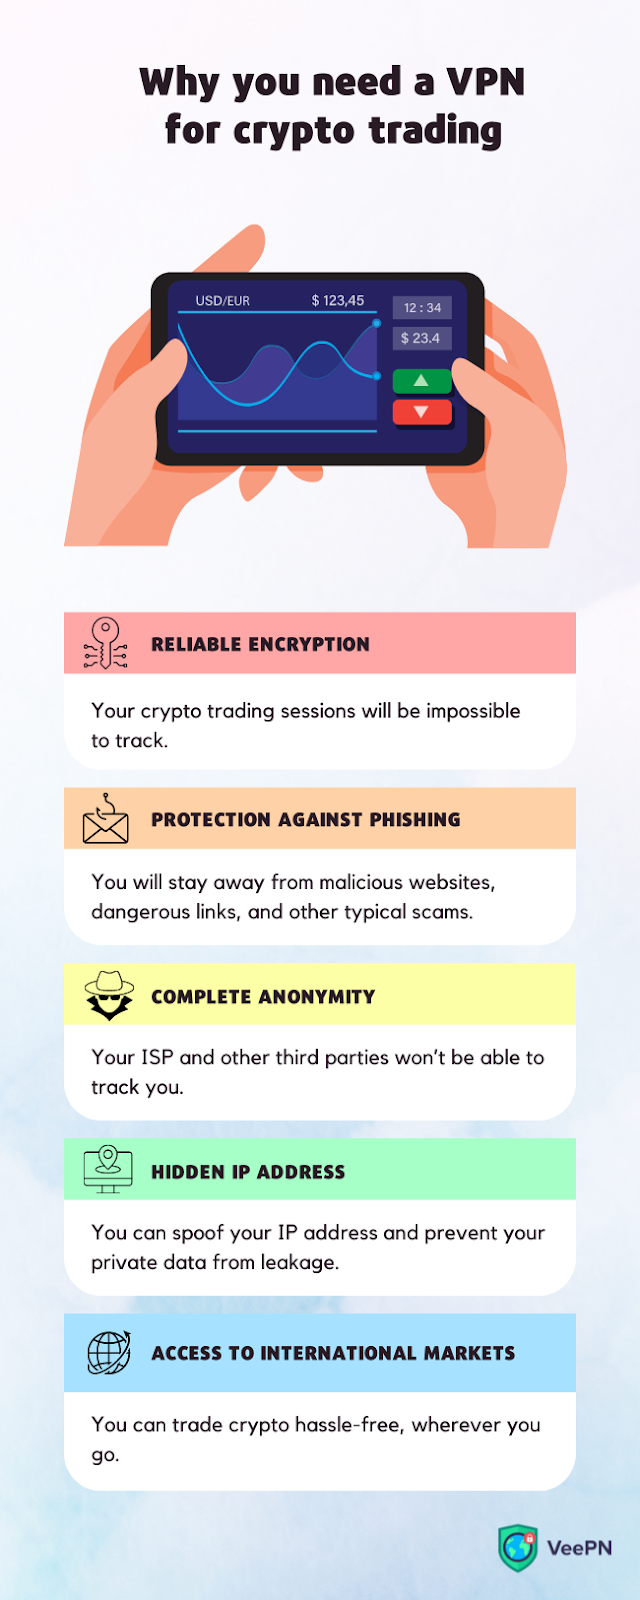 Reasons why you need a VPN for crypto trading.